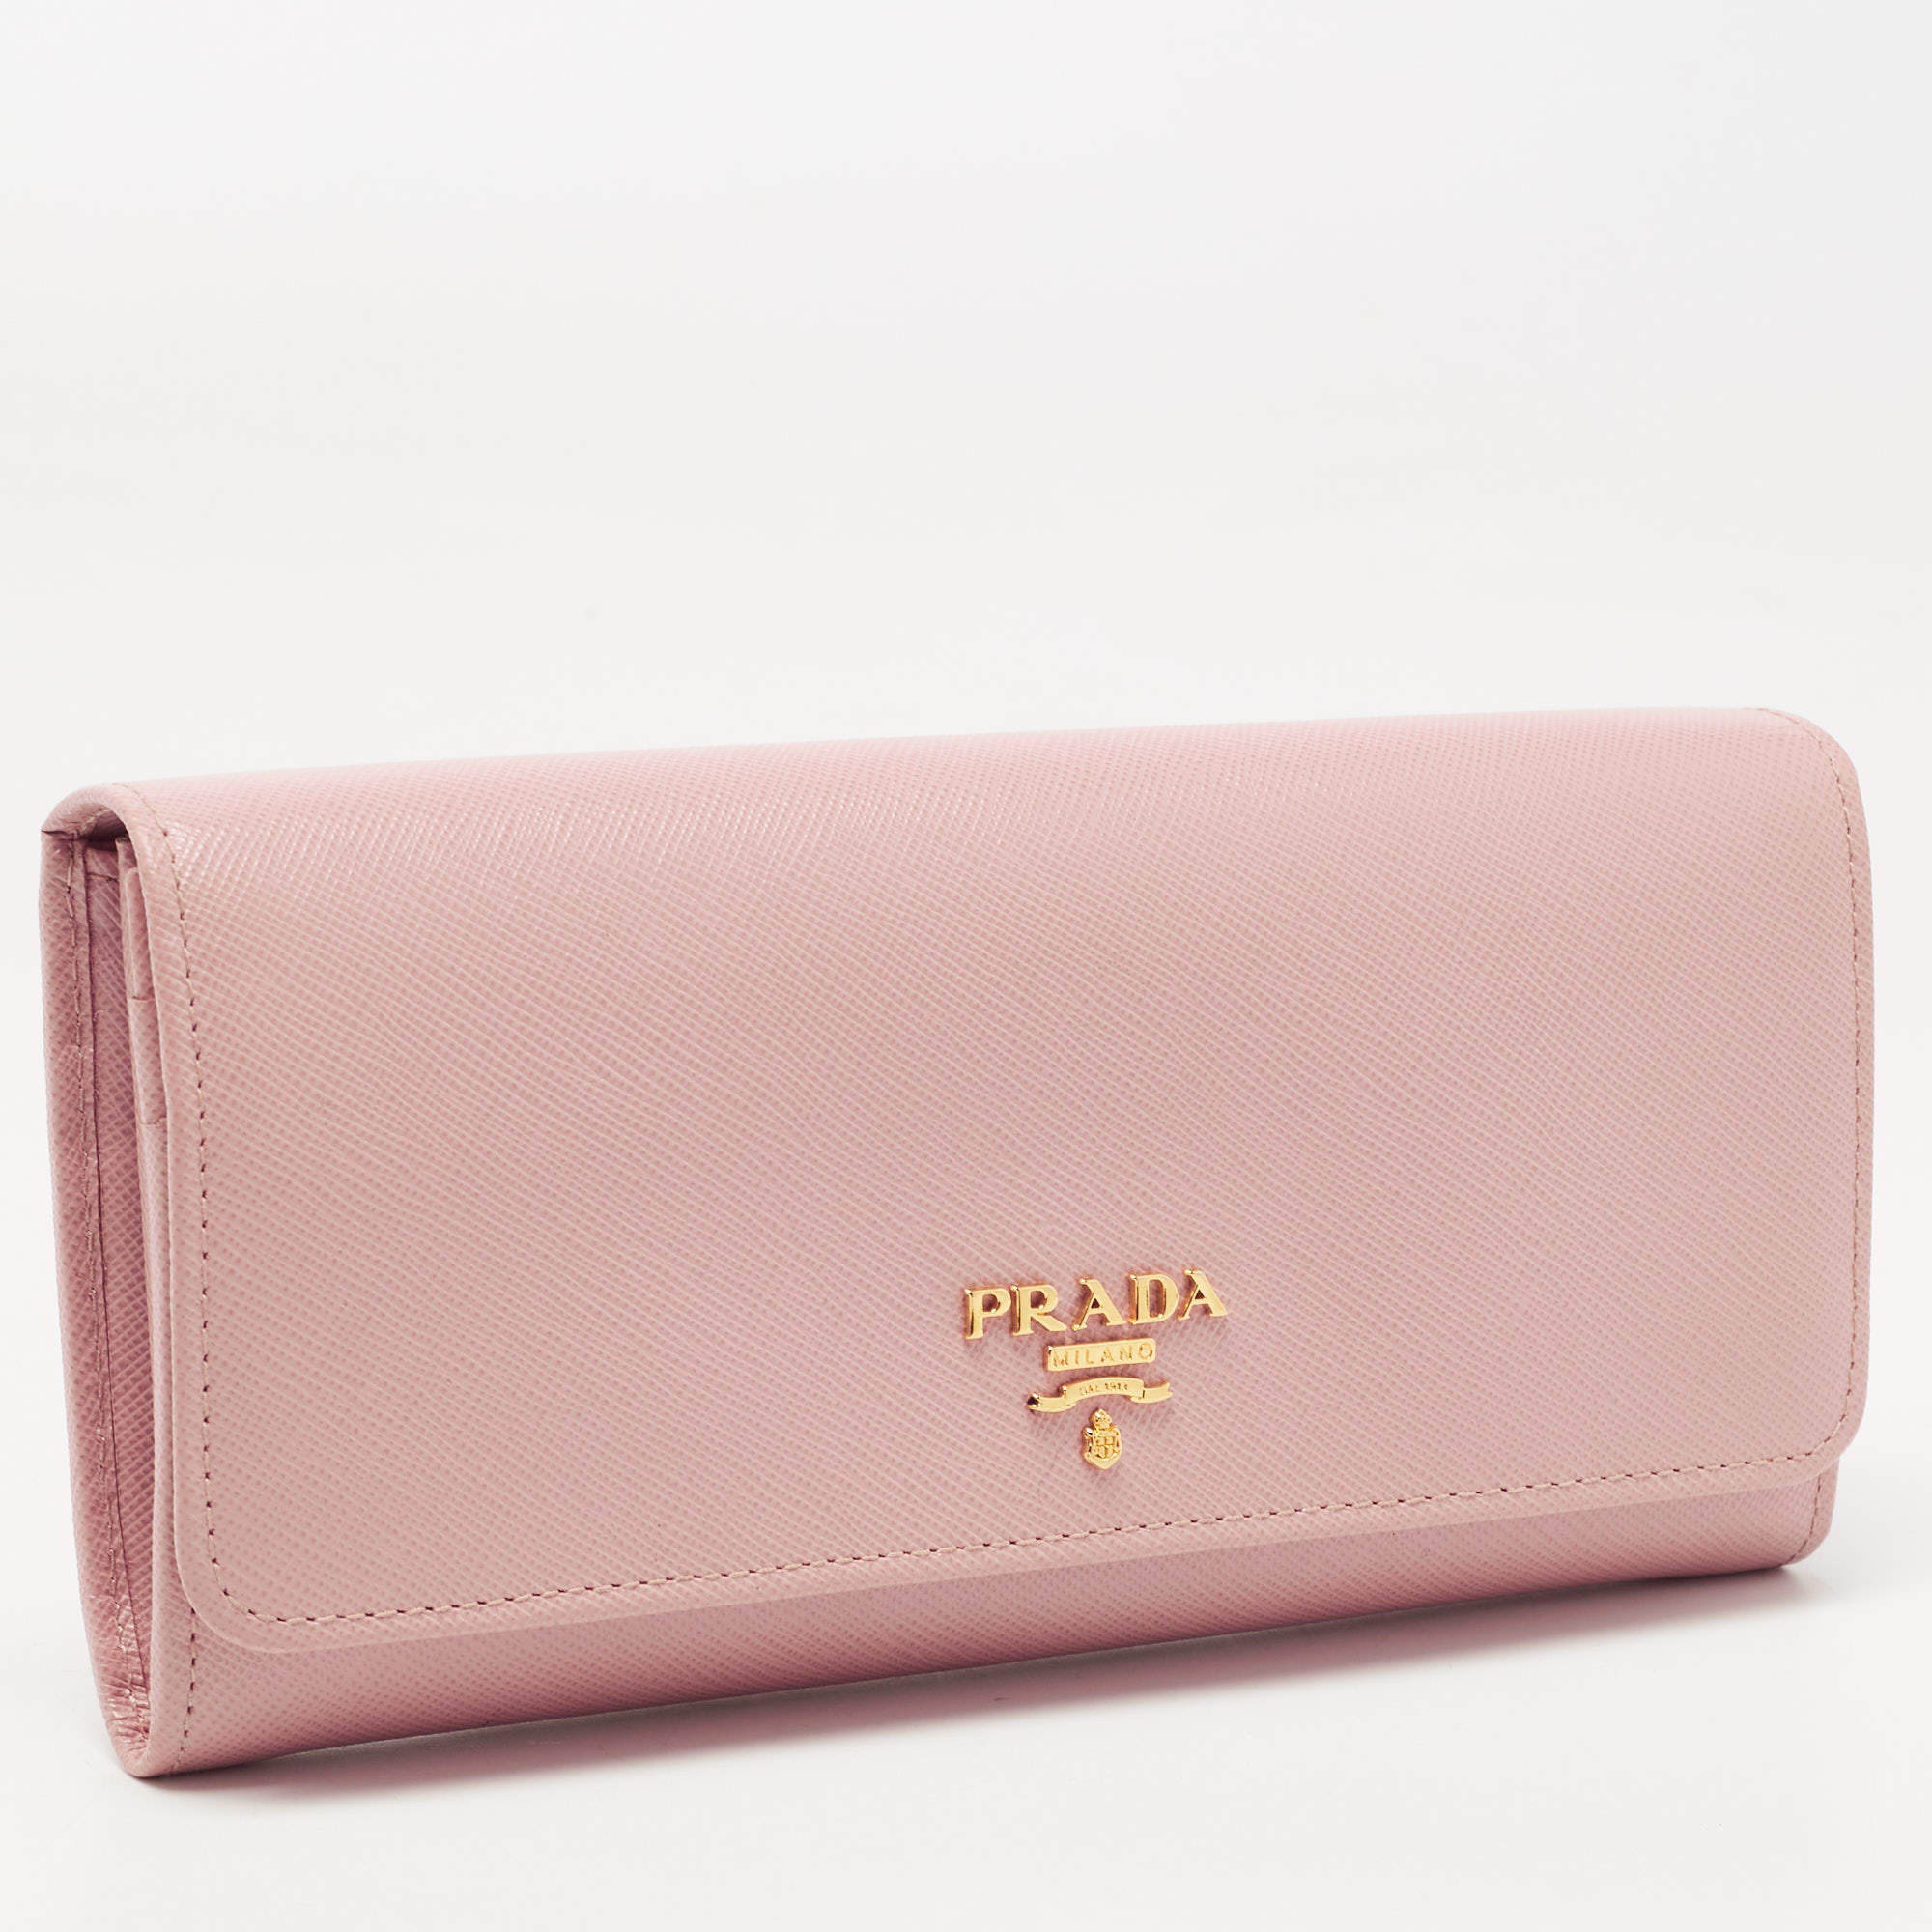 Prada, Bags, Authentic Prada Bright Pink Bow Saffiano Leather Gold Zip  Around Carryall Wallet